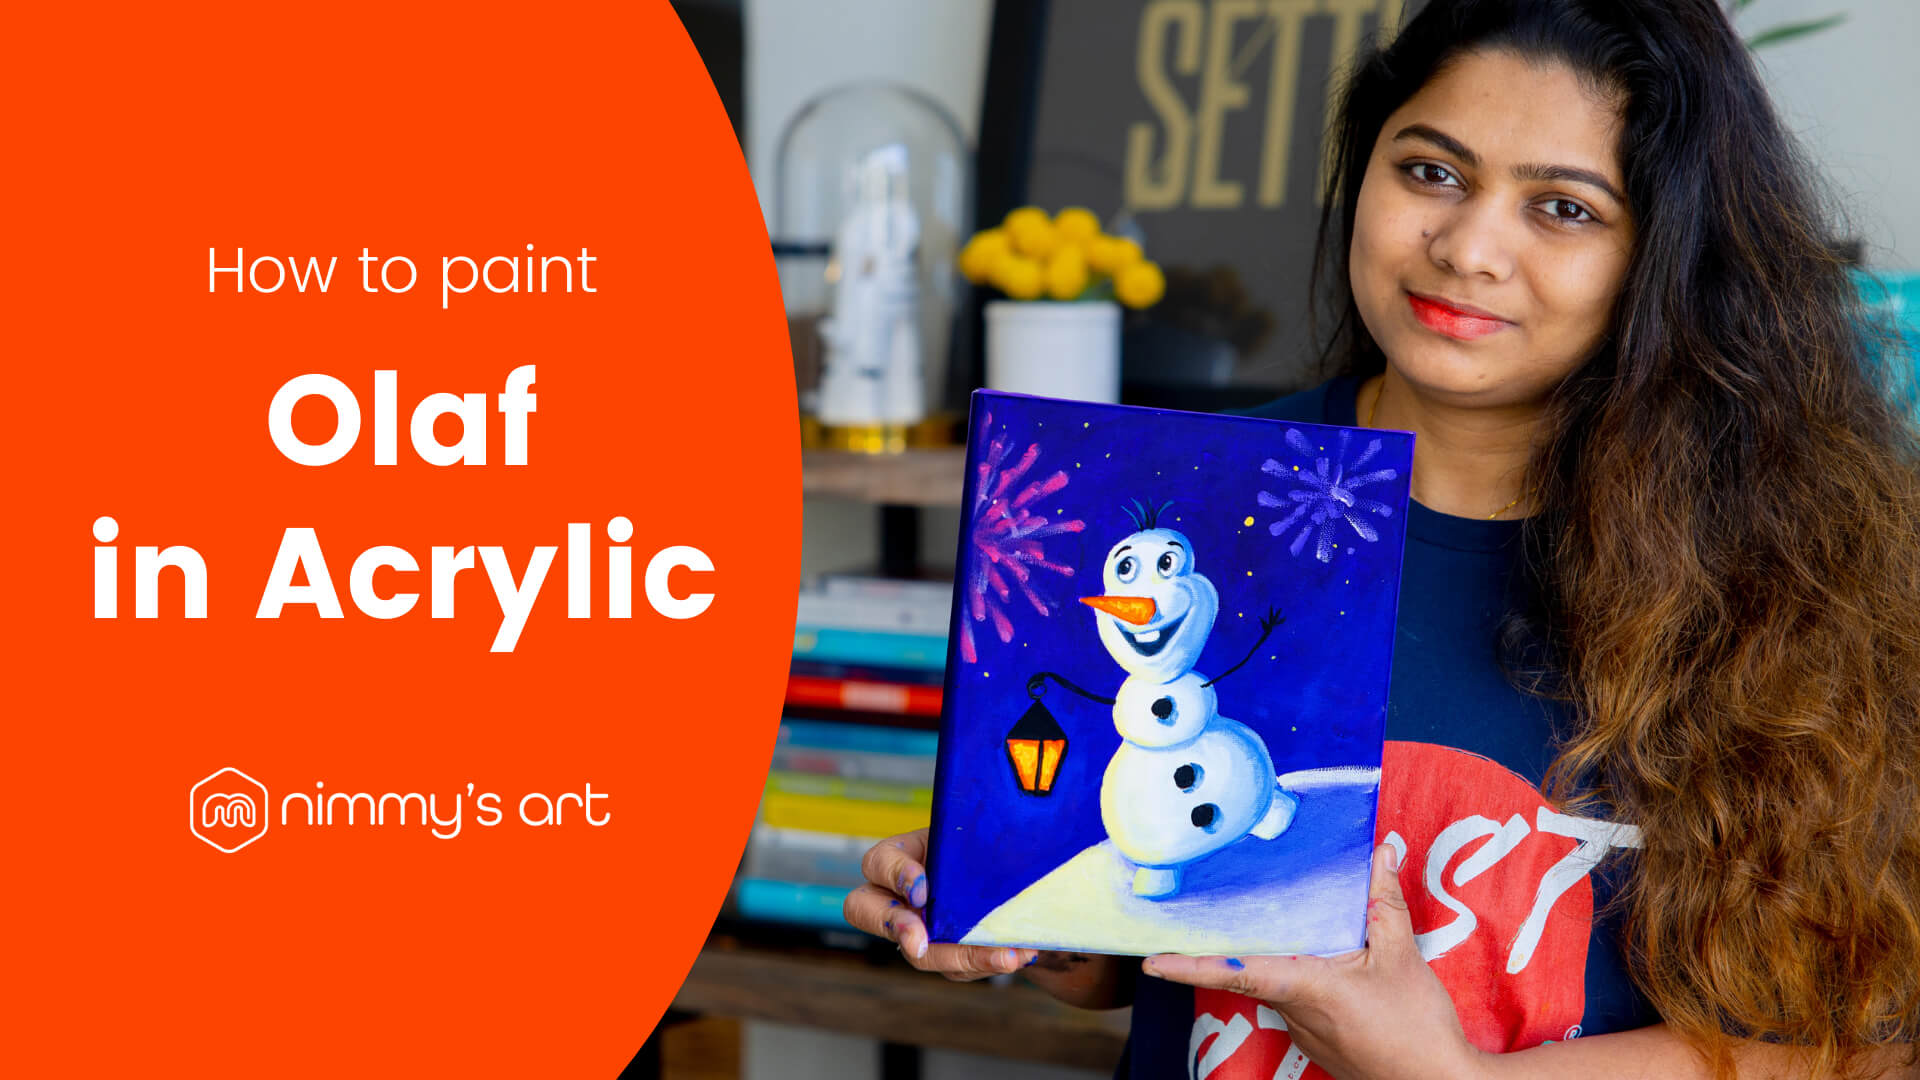 Nimmy holding the Olaf painting in acrylic done at our free art class in January 2021